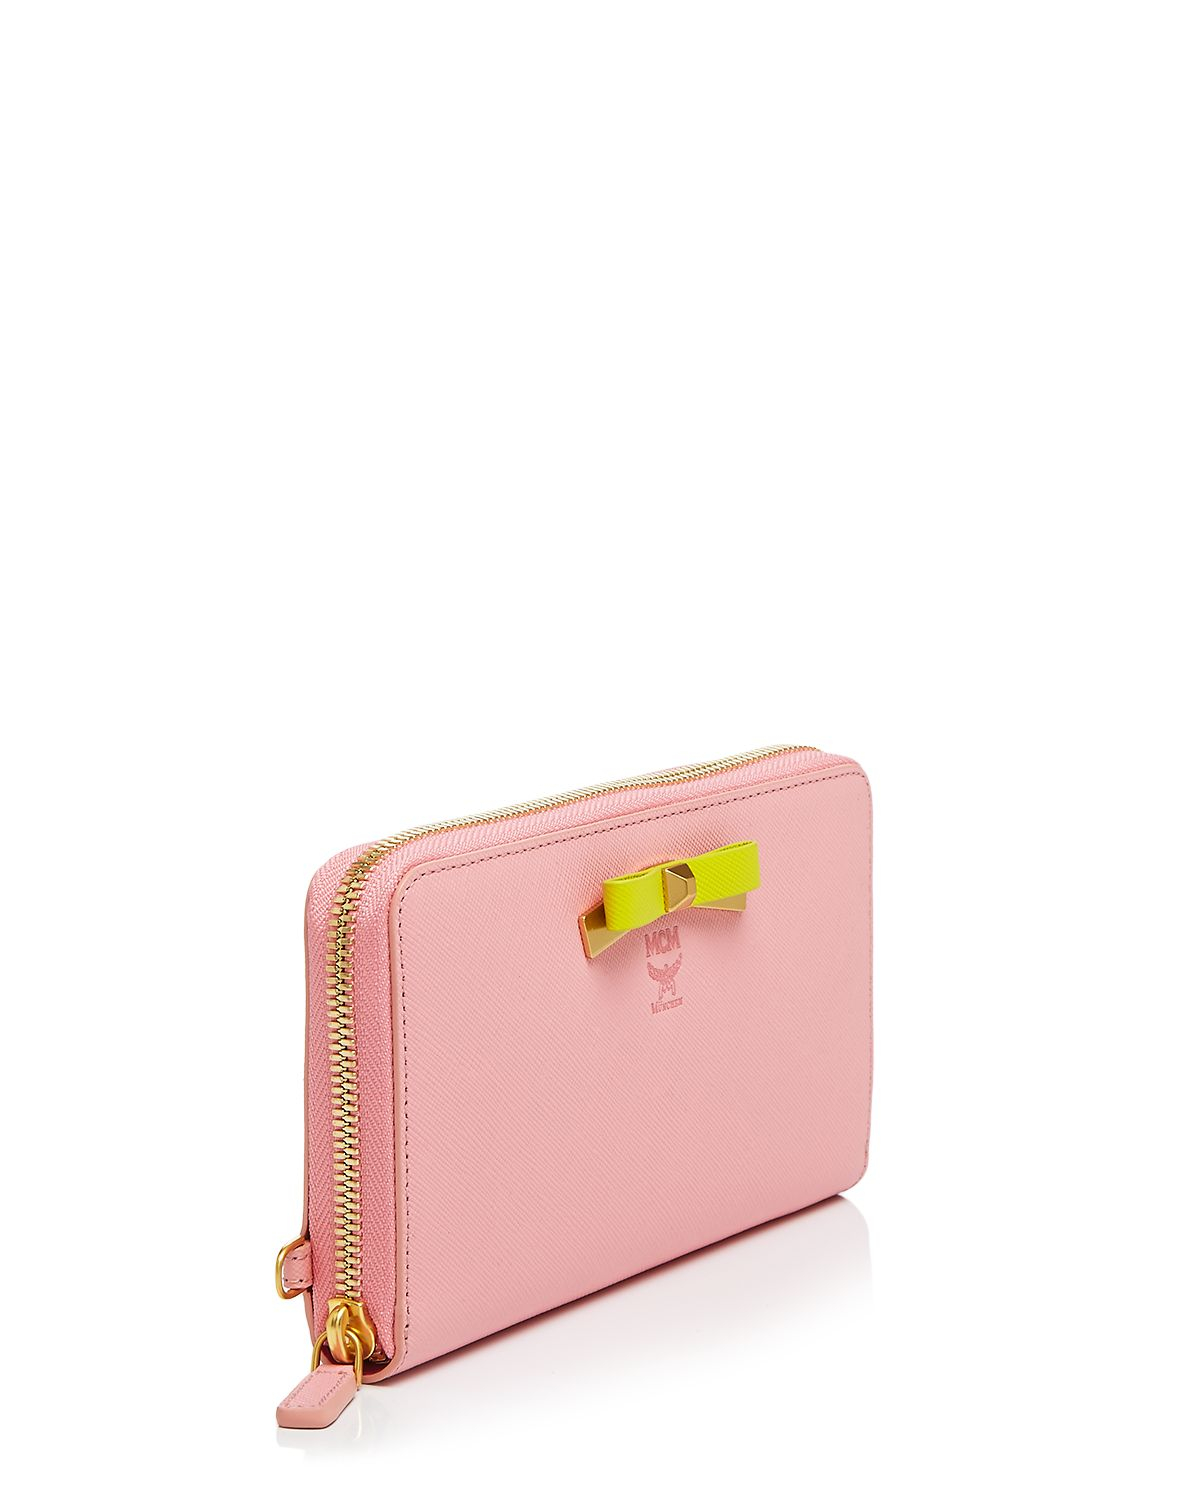 Lyst - Mcm Wallet - Mina Zipped Large in Pink